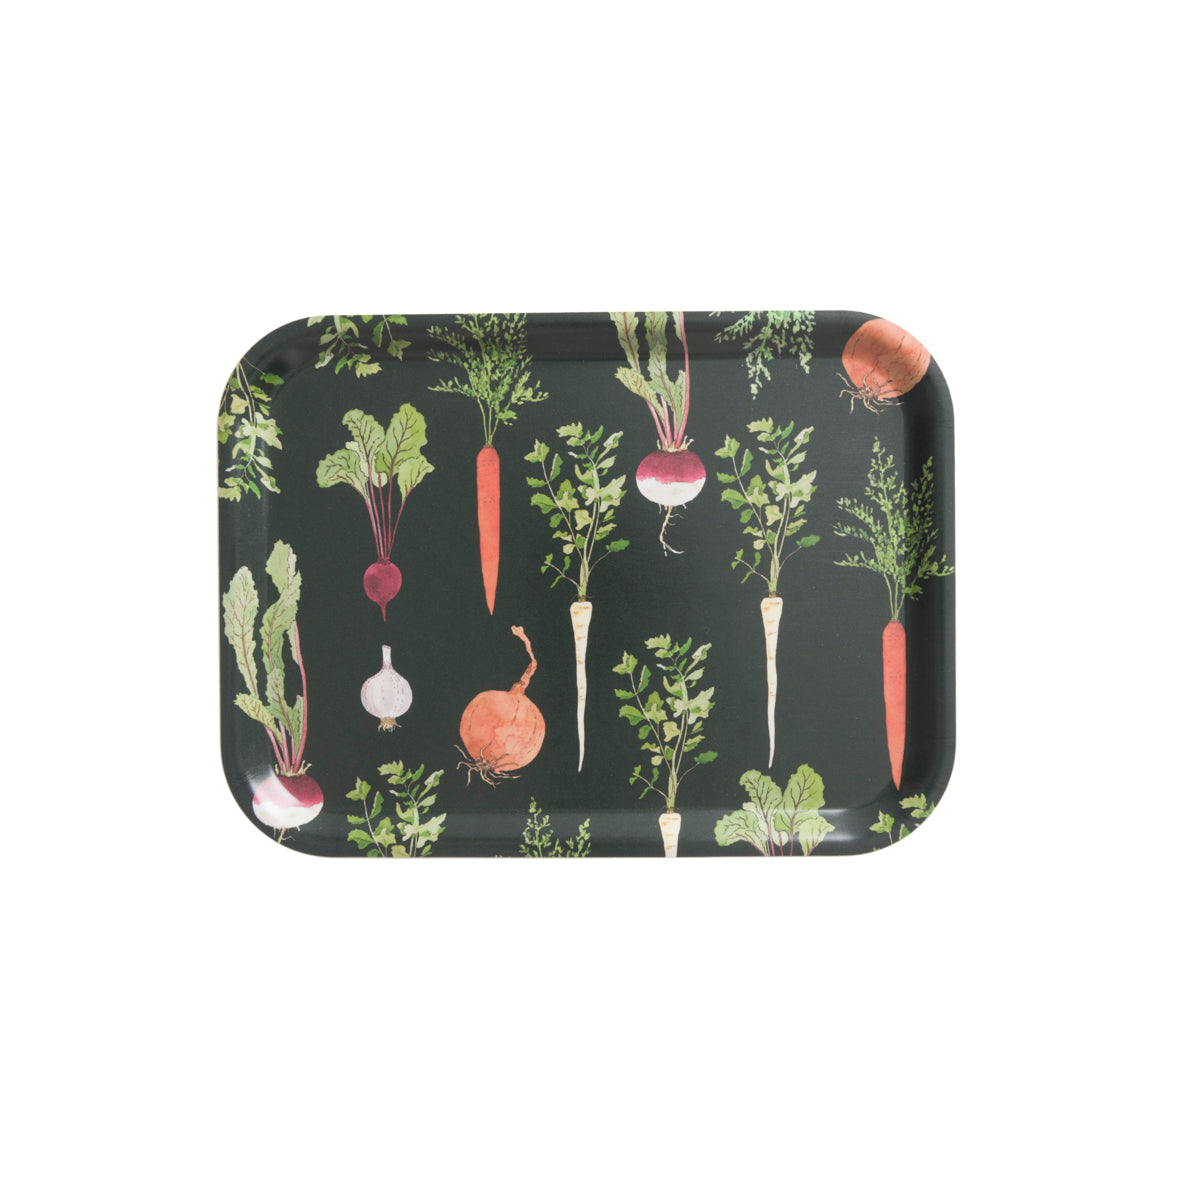 Home Grown Printed Tray Small by Sophie Allport